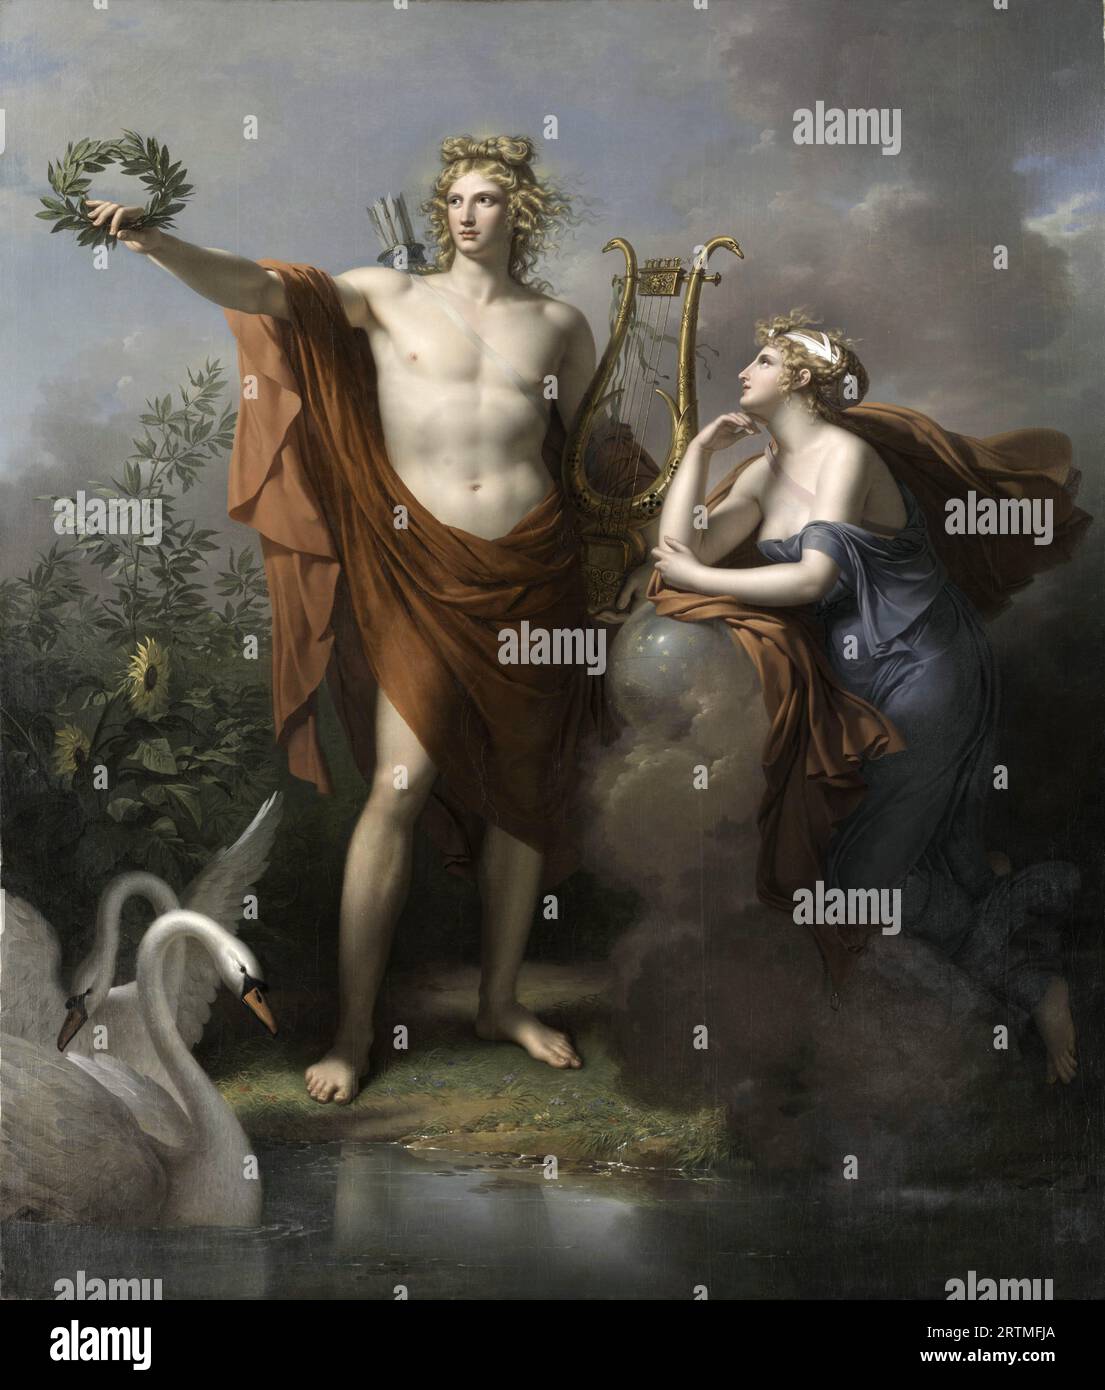 Apollo God of Light ,Eloquence, Poetry and Fine Arts with Urania Muse of Astronomy, oil painting by French artist Charles Meynier, 1798 Stock Photo